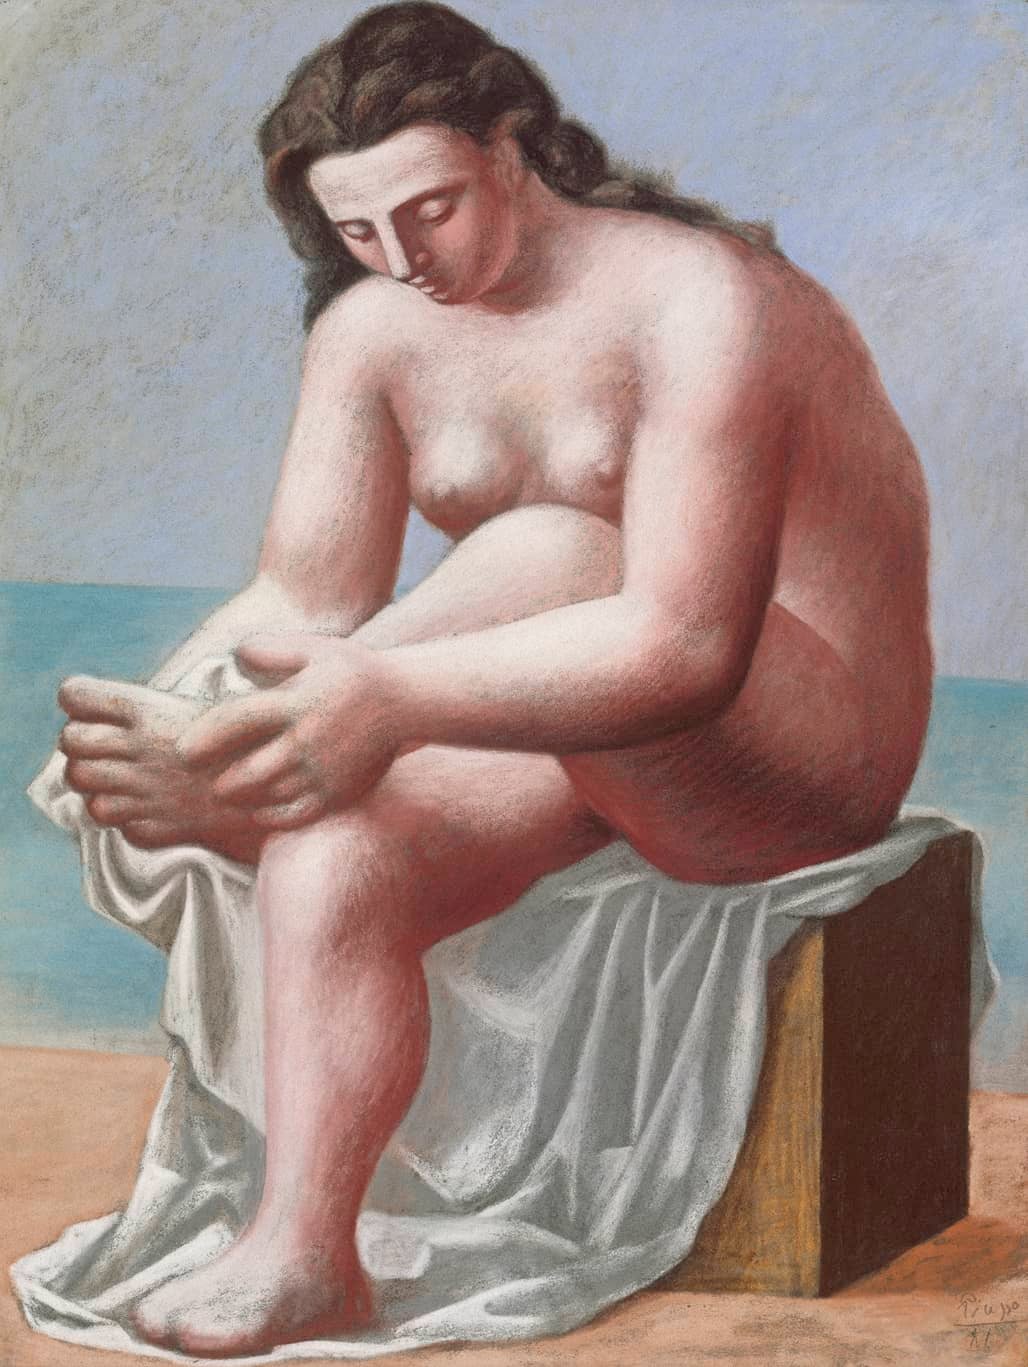 Pablo Picasso, 1921, Nu Assis Sessuyant le Pied (Seated Nude Drying her Foot), pastel, 66 x 50.8 cm, Berggruen Museum.